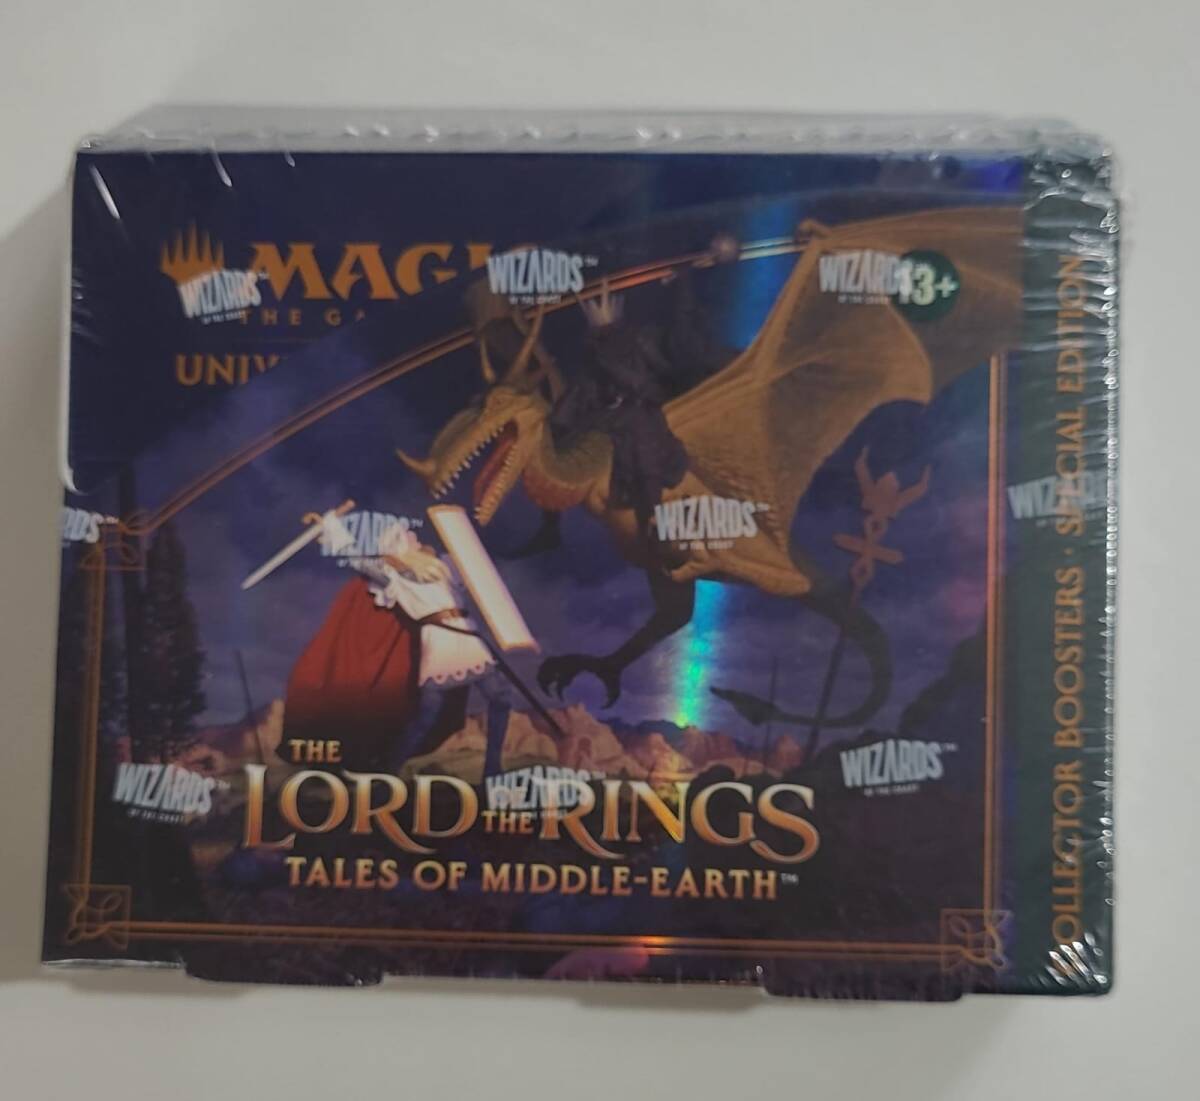 MTG 指輪物語 中つ国の伝承 The Lord of the Rings:Tales of Middle-earth Collector Booster Special Edition 12パック入りBOX 英語版の画像1